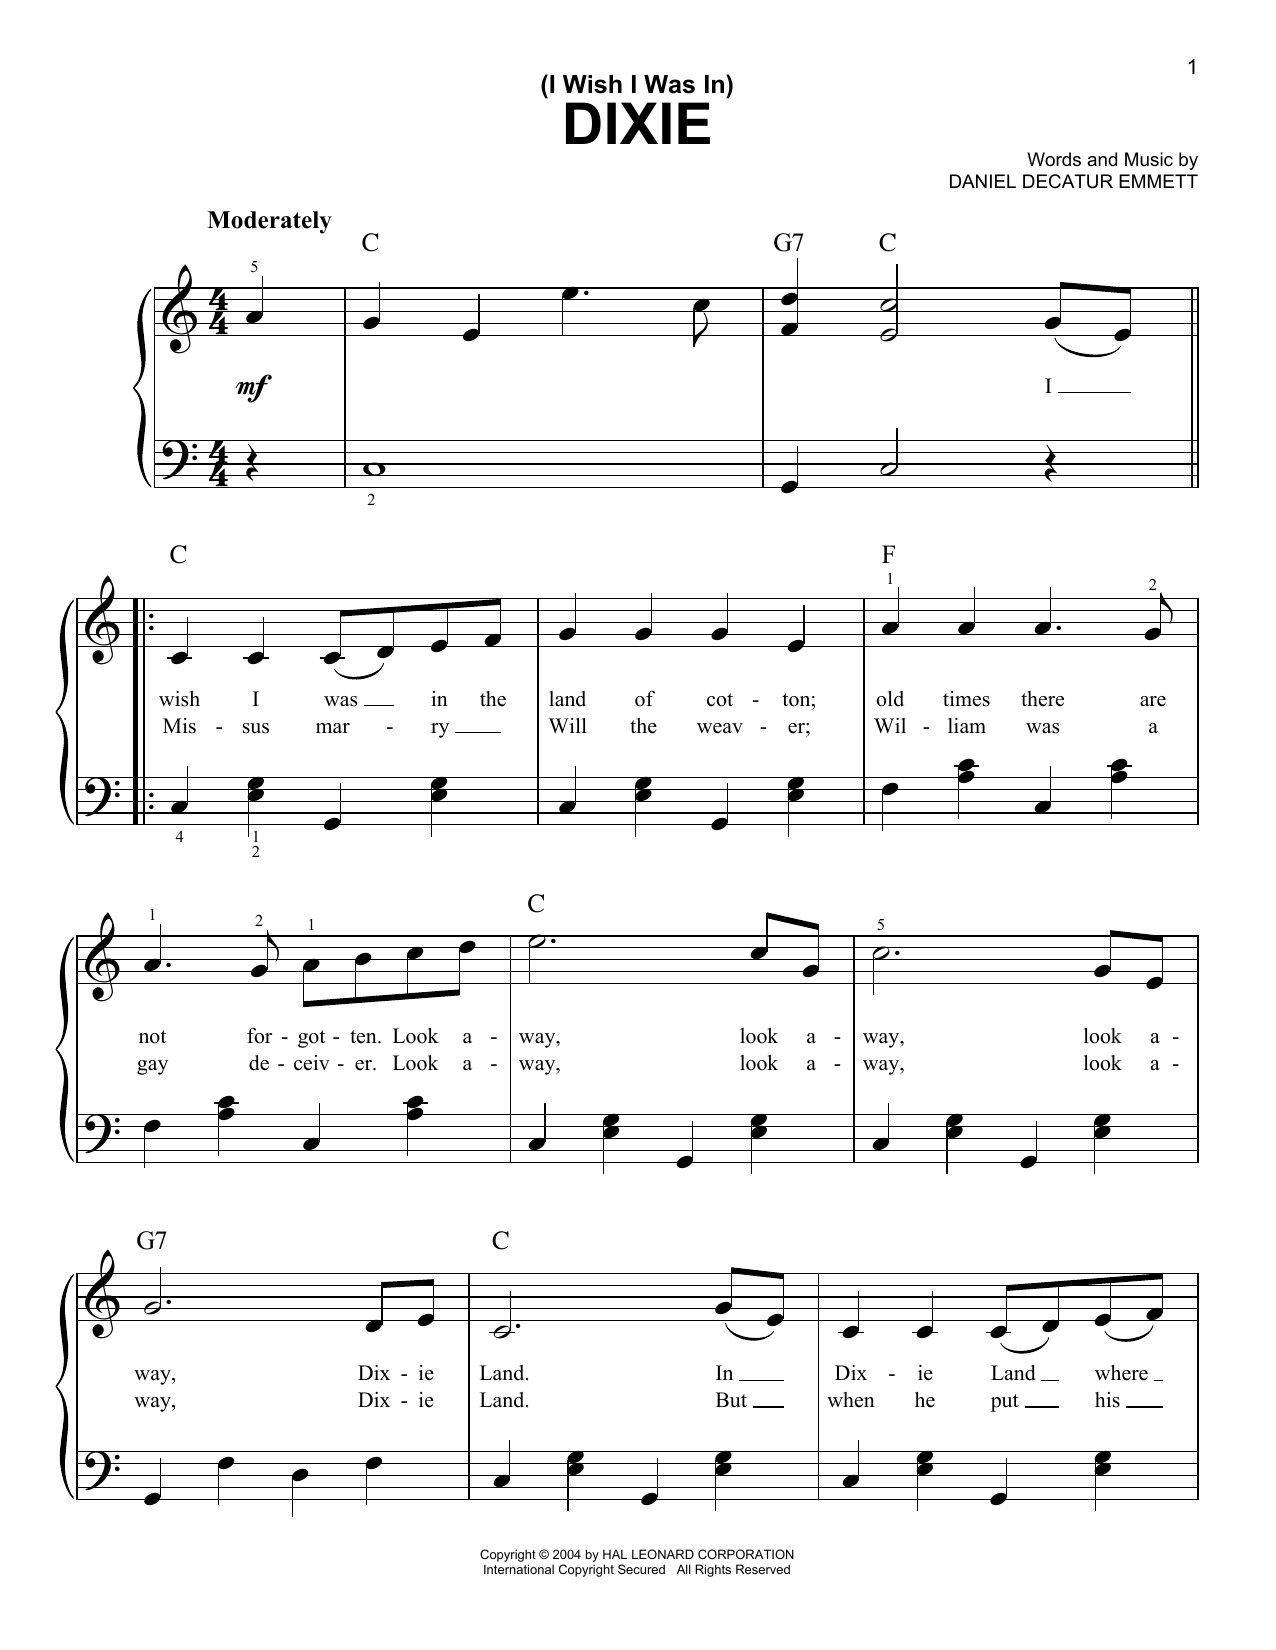 Daniel Decatur Emmett (I Wish I Was In) Dixie sheet music notes and chords. Download Printable PDF.